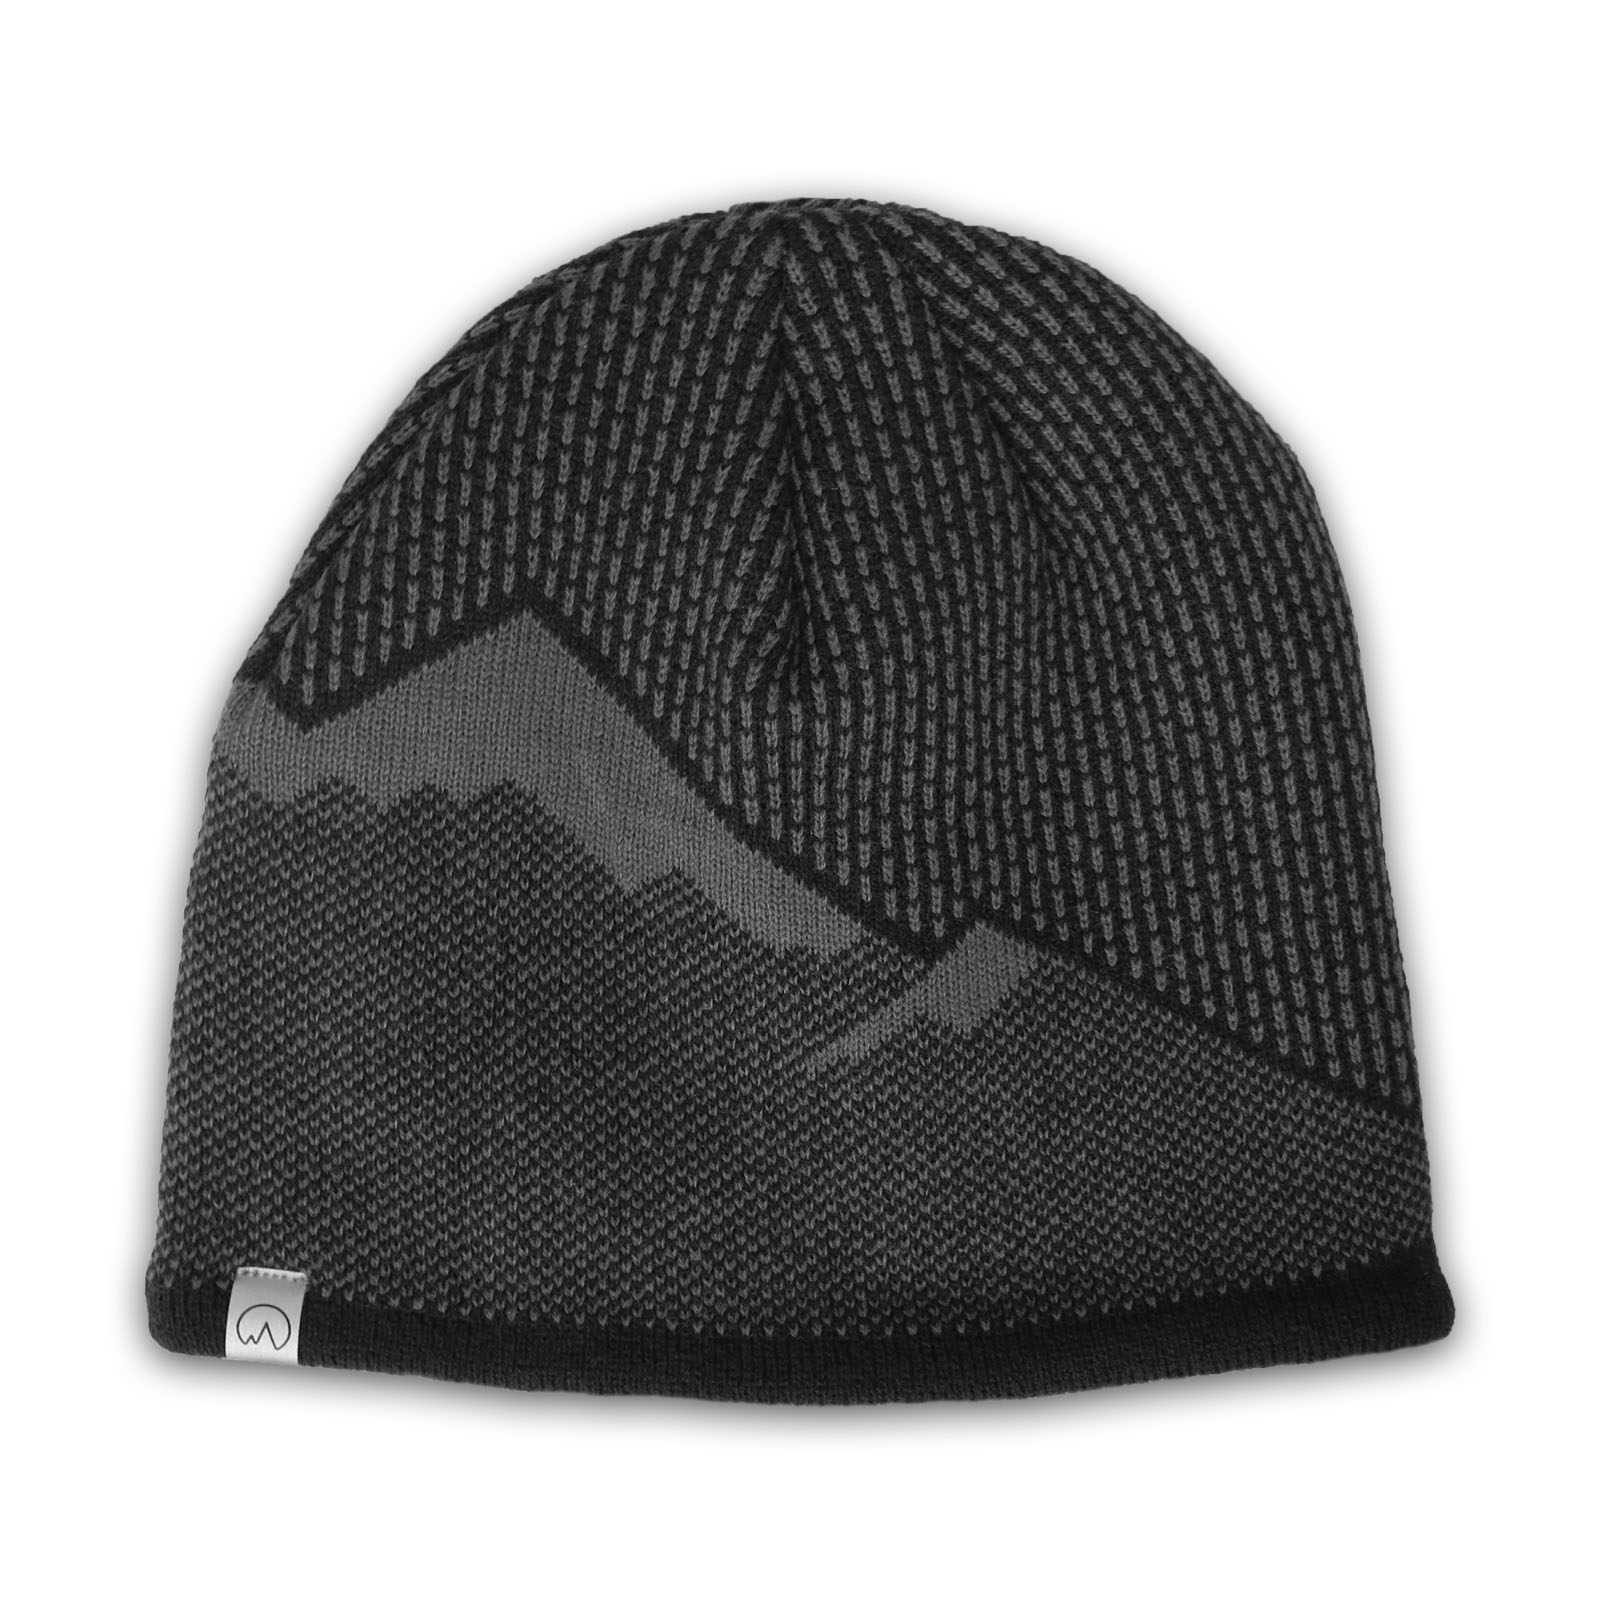 Polar Extreme's Windproof Head Wear Polar Fleece Winter Beanie | Cold Weather Mid-weight Cap Skully Hat for Men | Perfect for Sports & Daily Wear (Black) - image 1 of 2